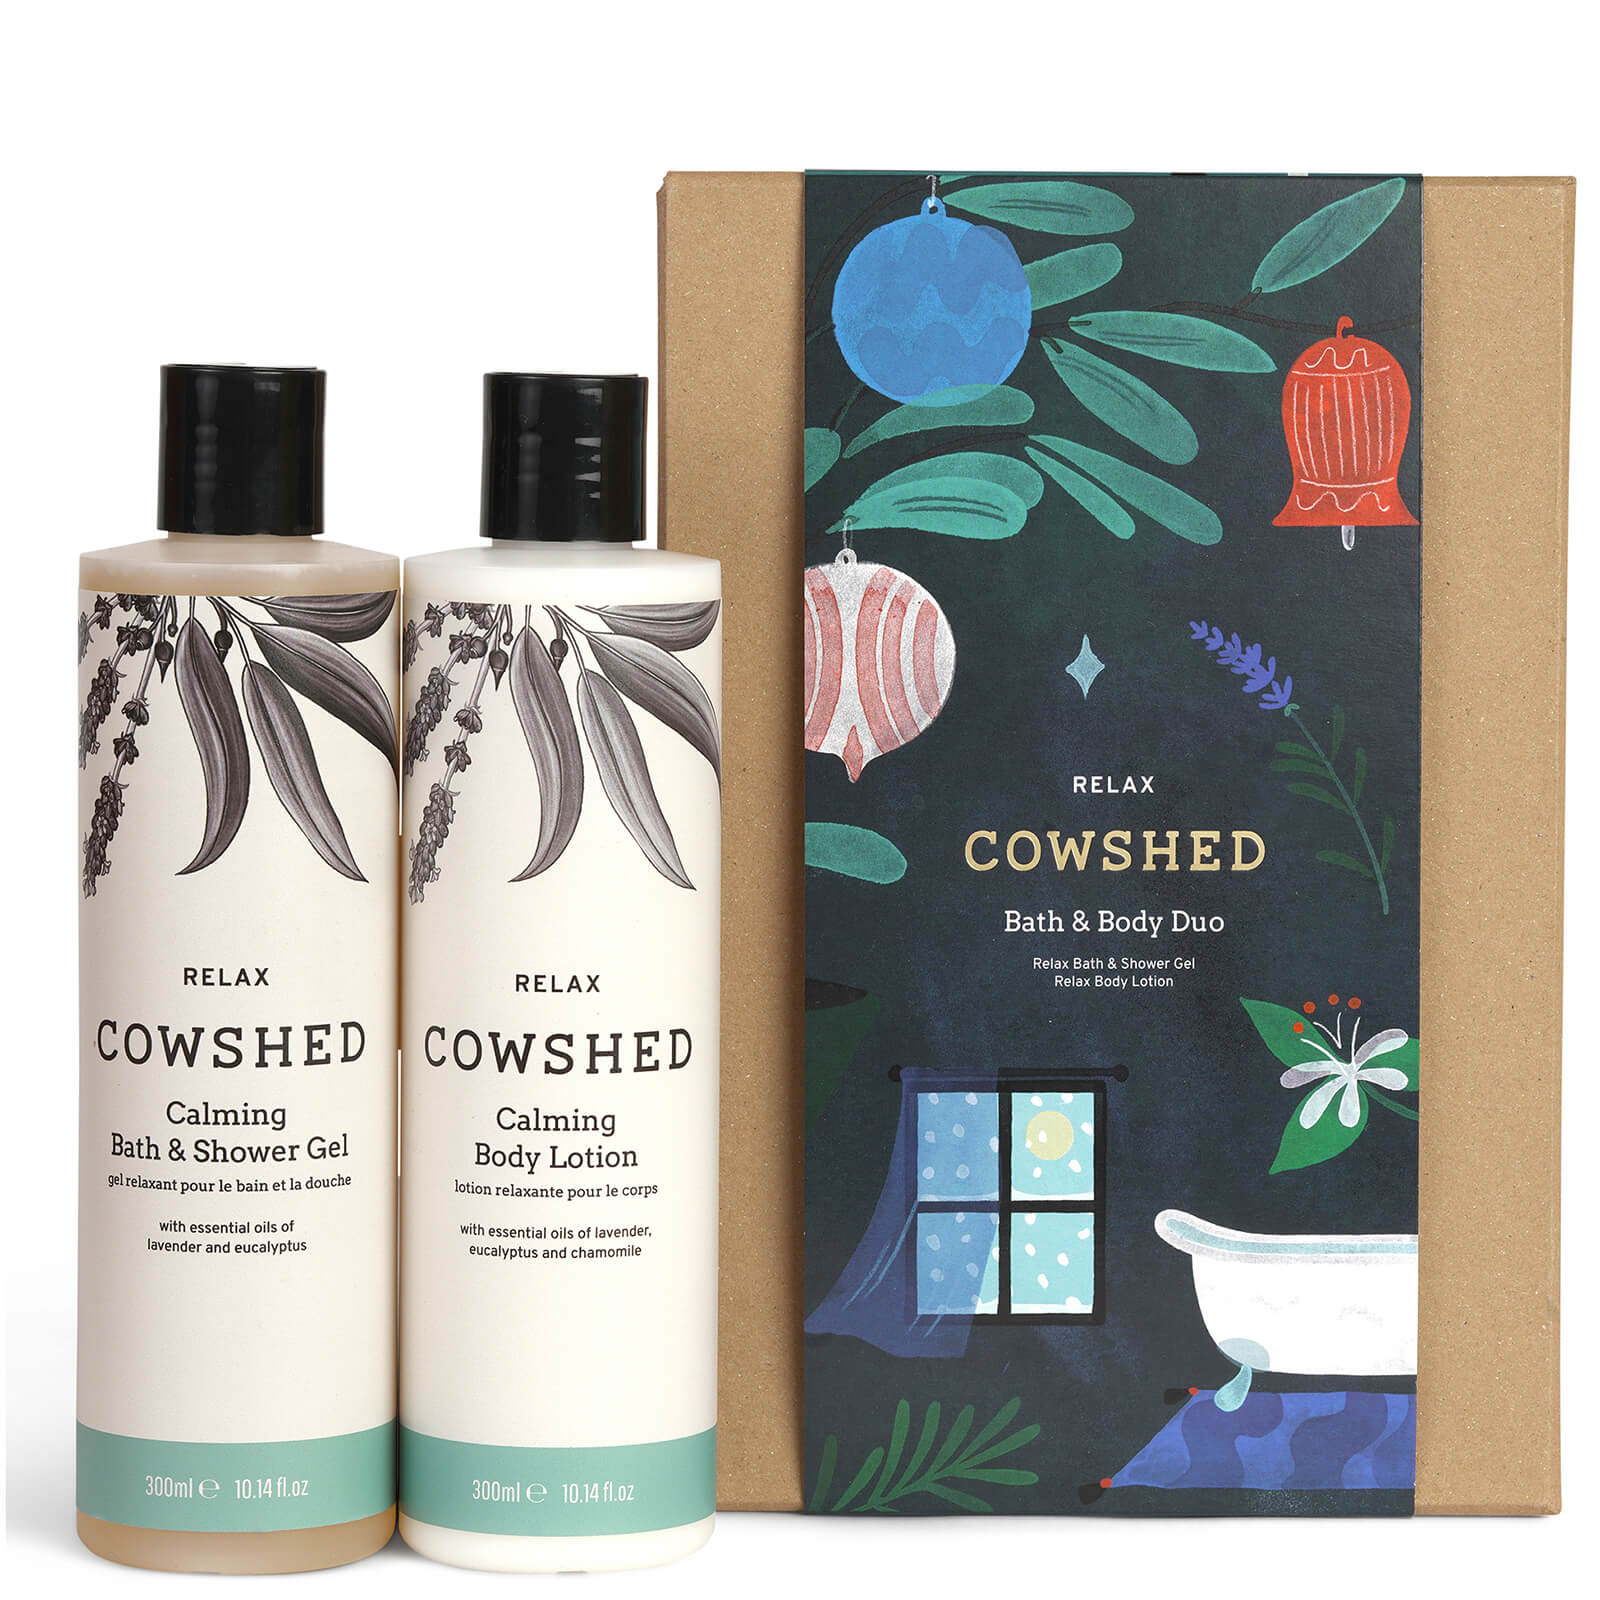 Cowshed Relax Bath and Body Duo